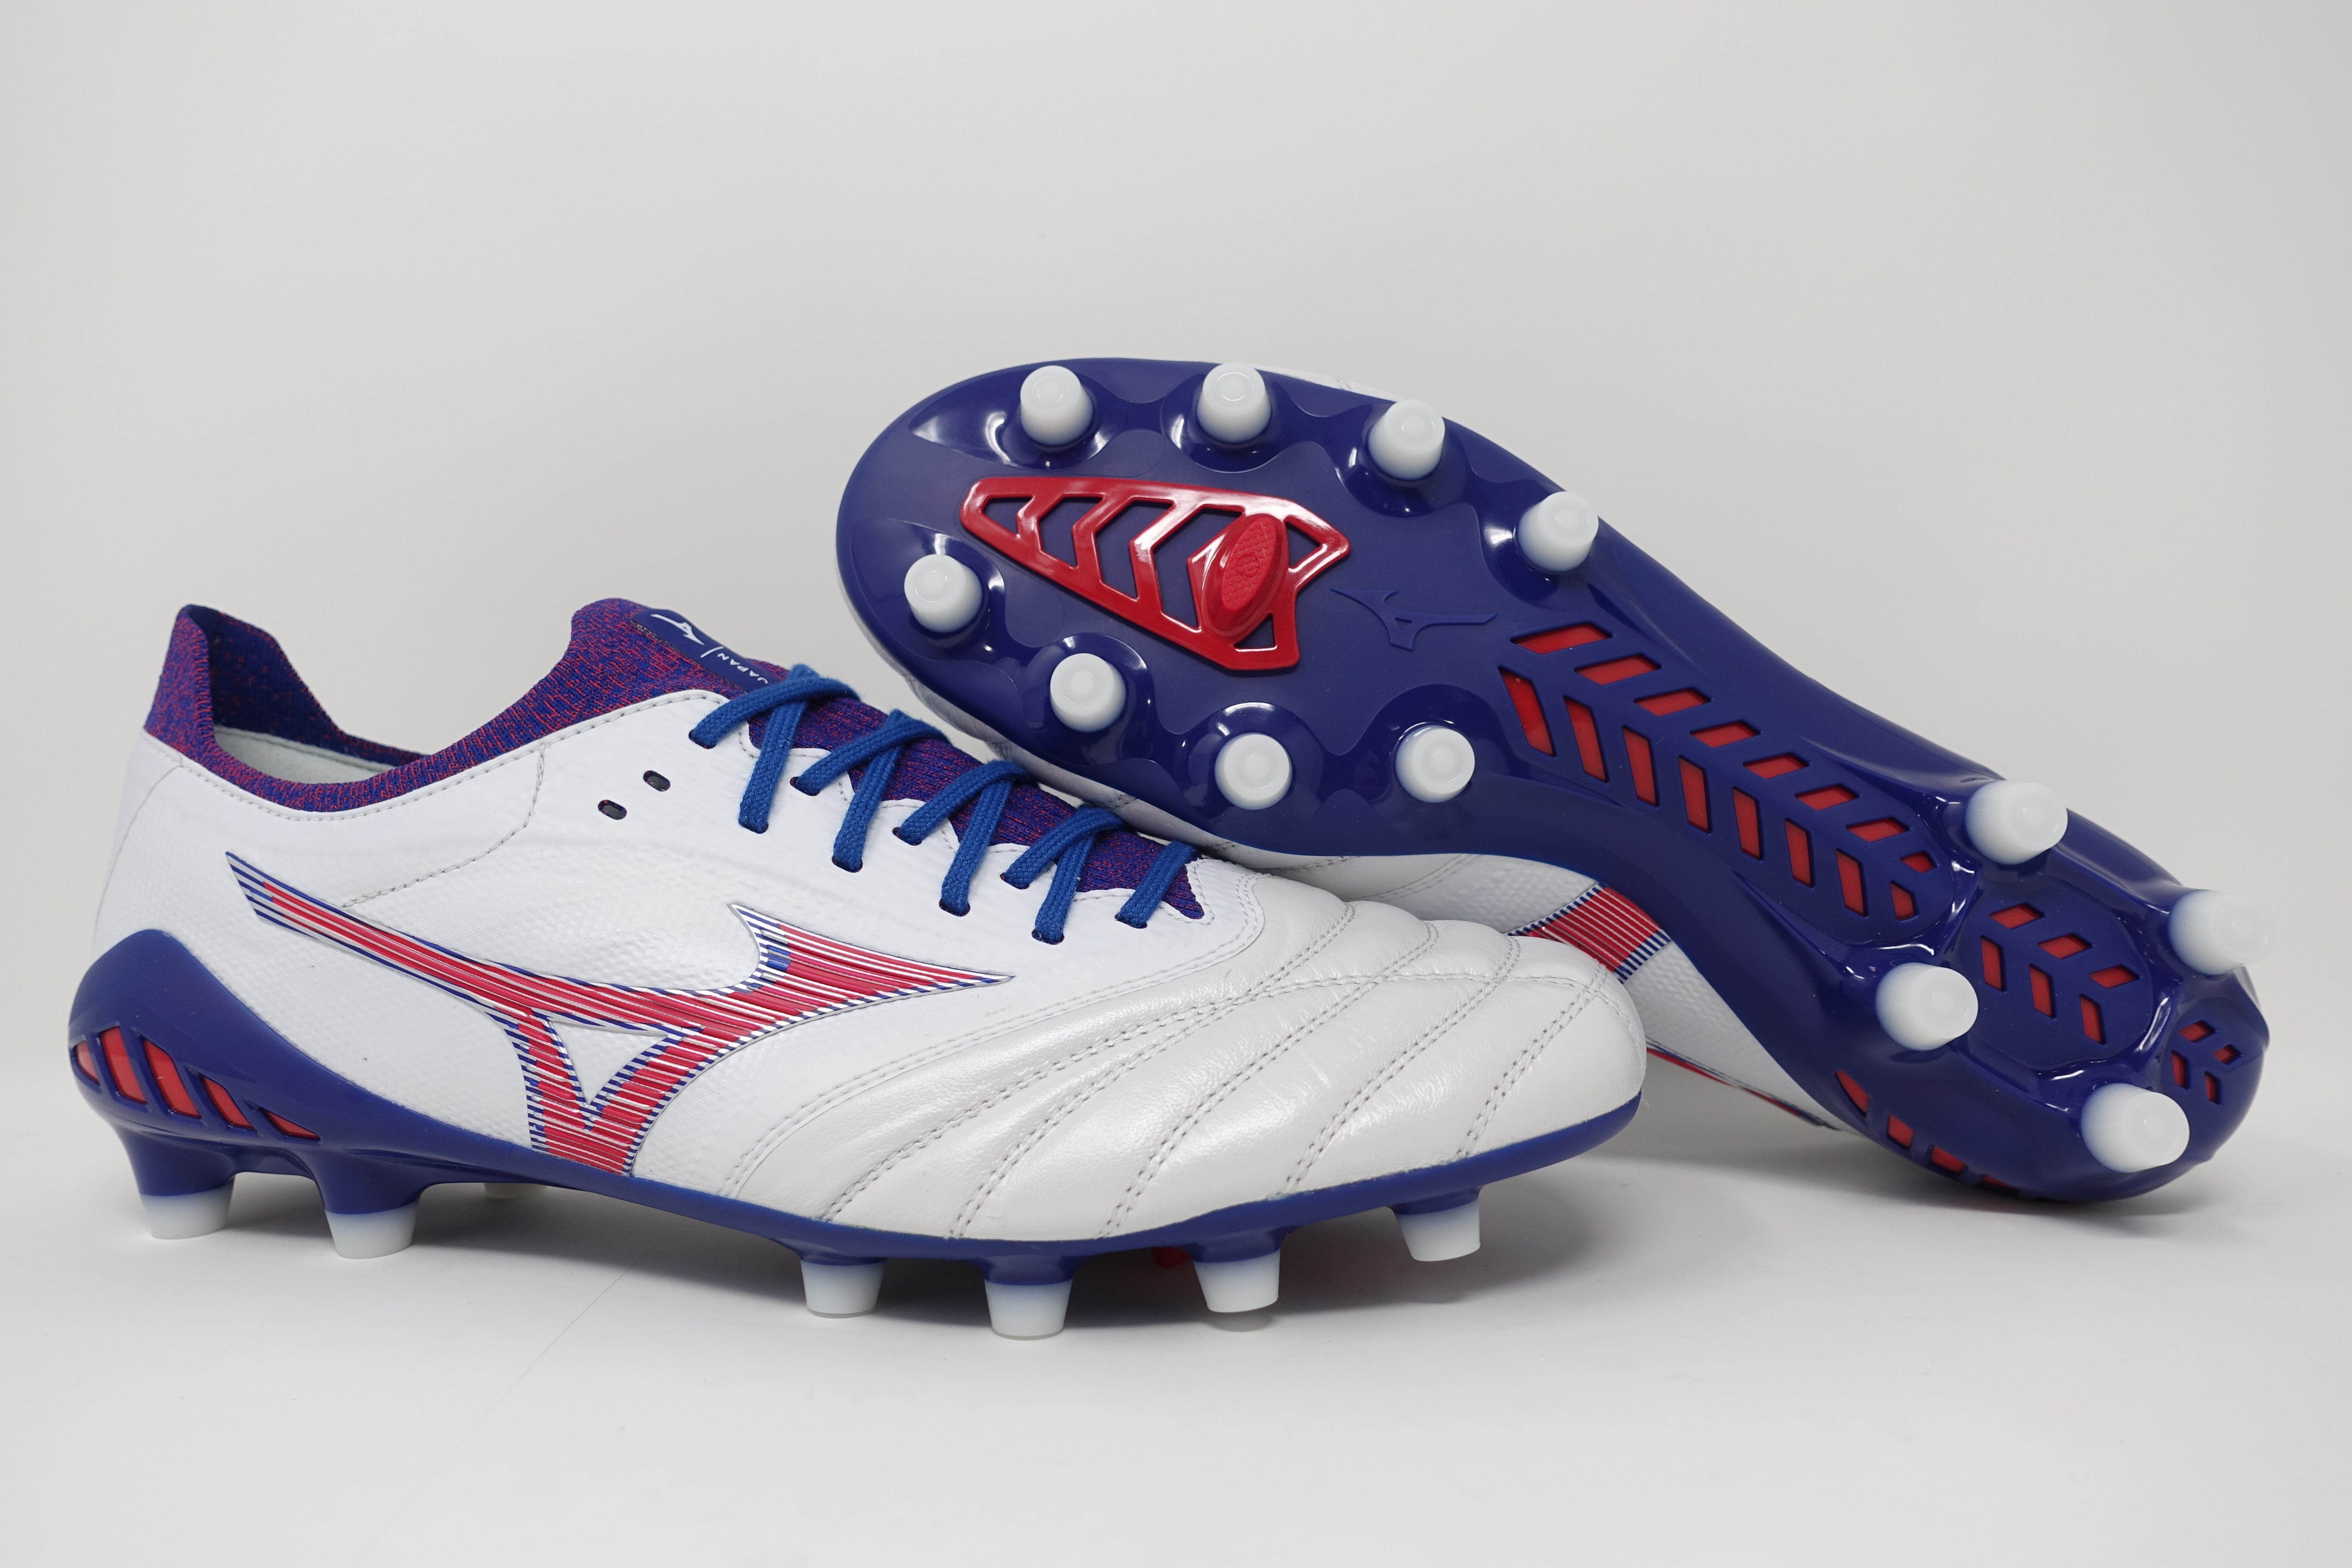 Mizuno-Morelia-Neo-3-Made-in-Japan-Next-Wave-Pack-Soccer-Football-Boots-1